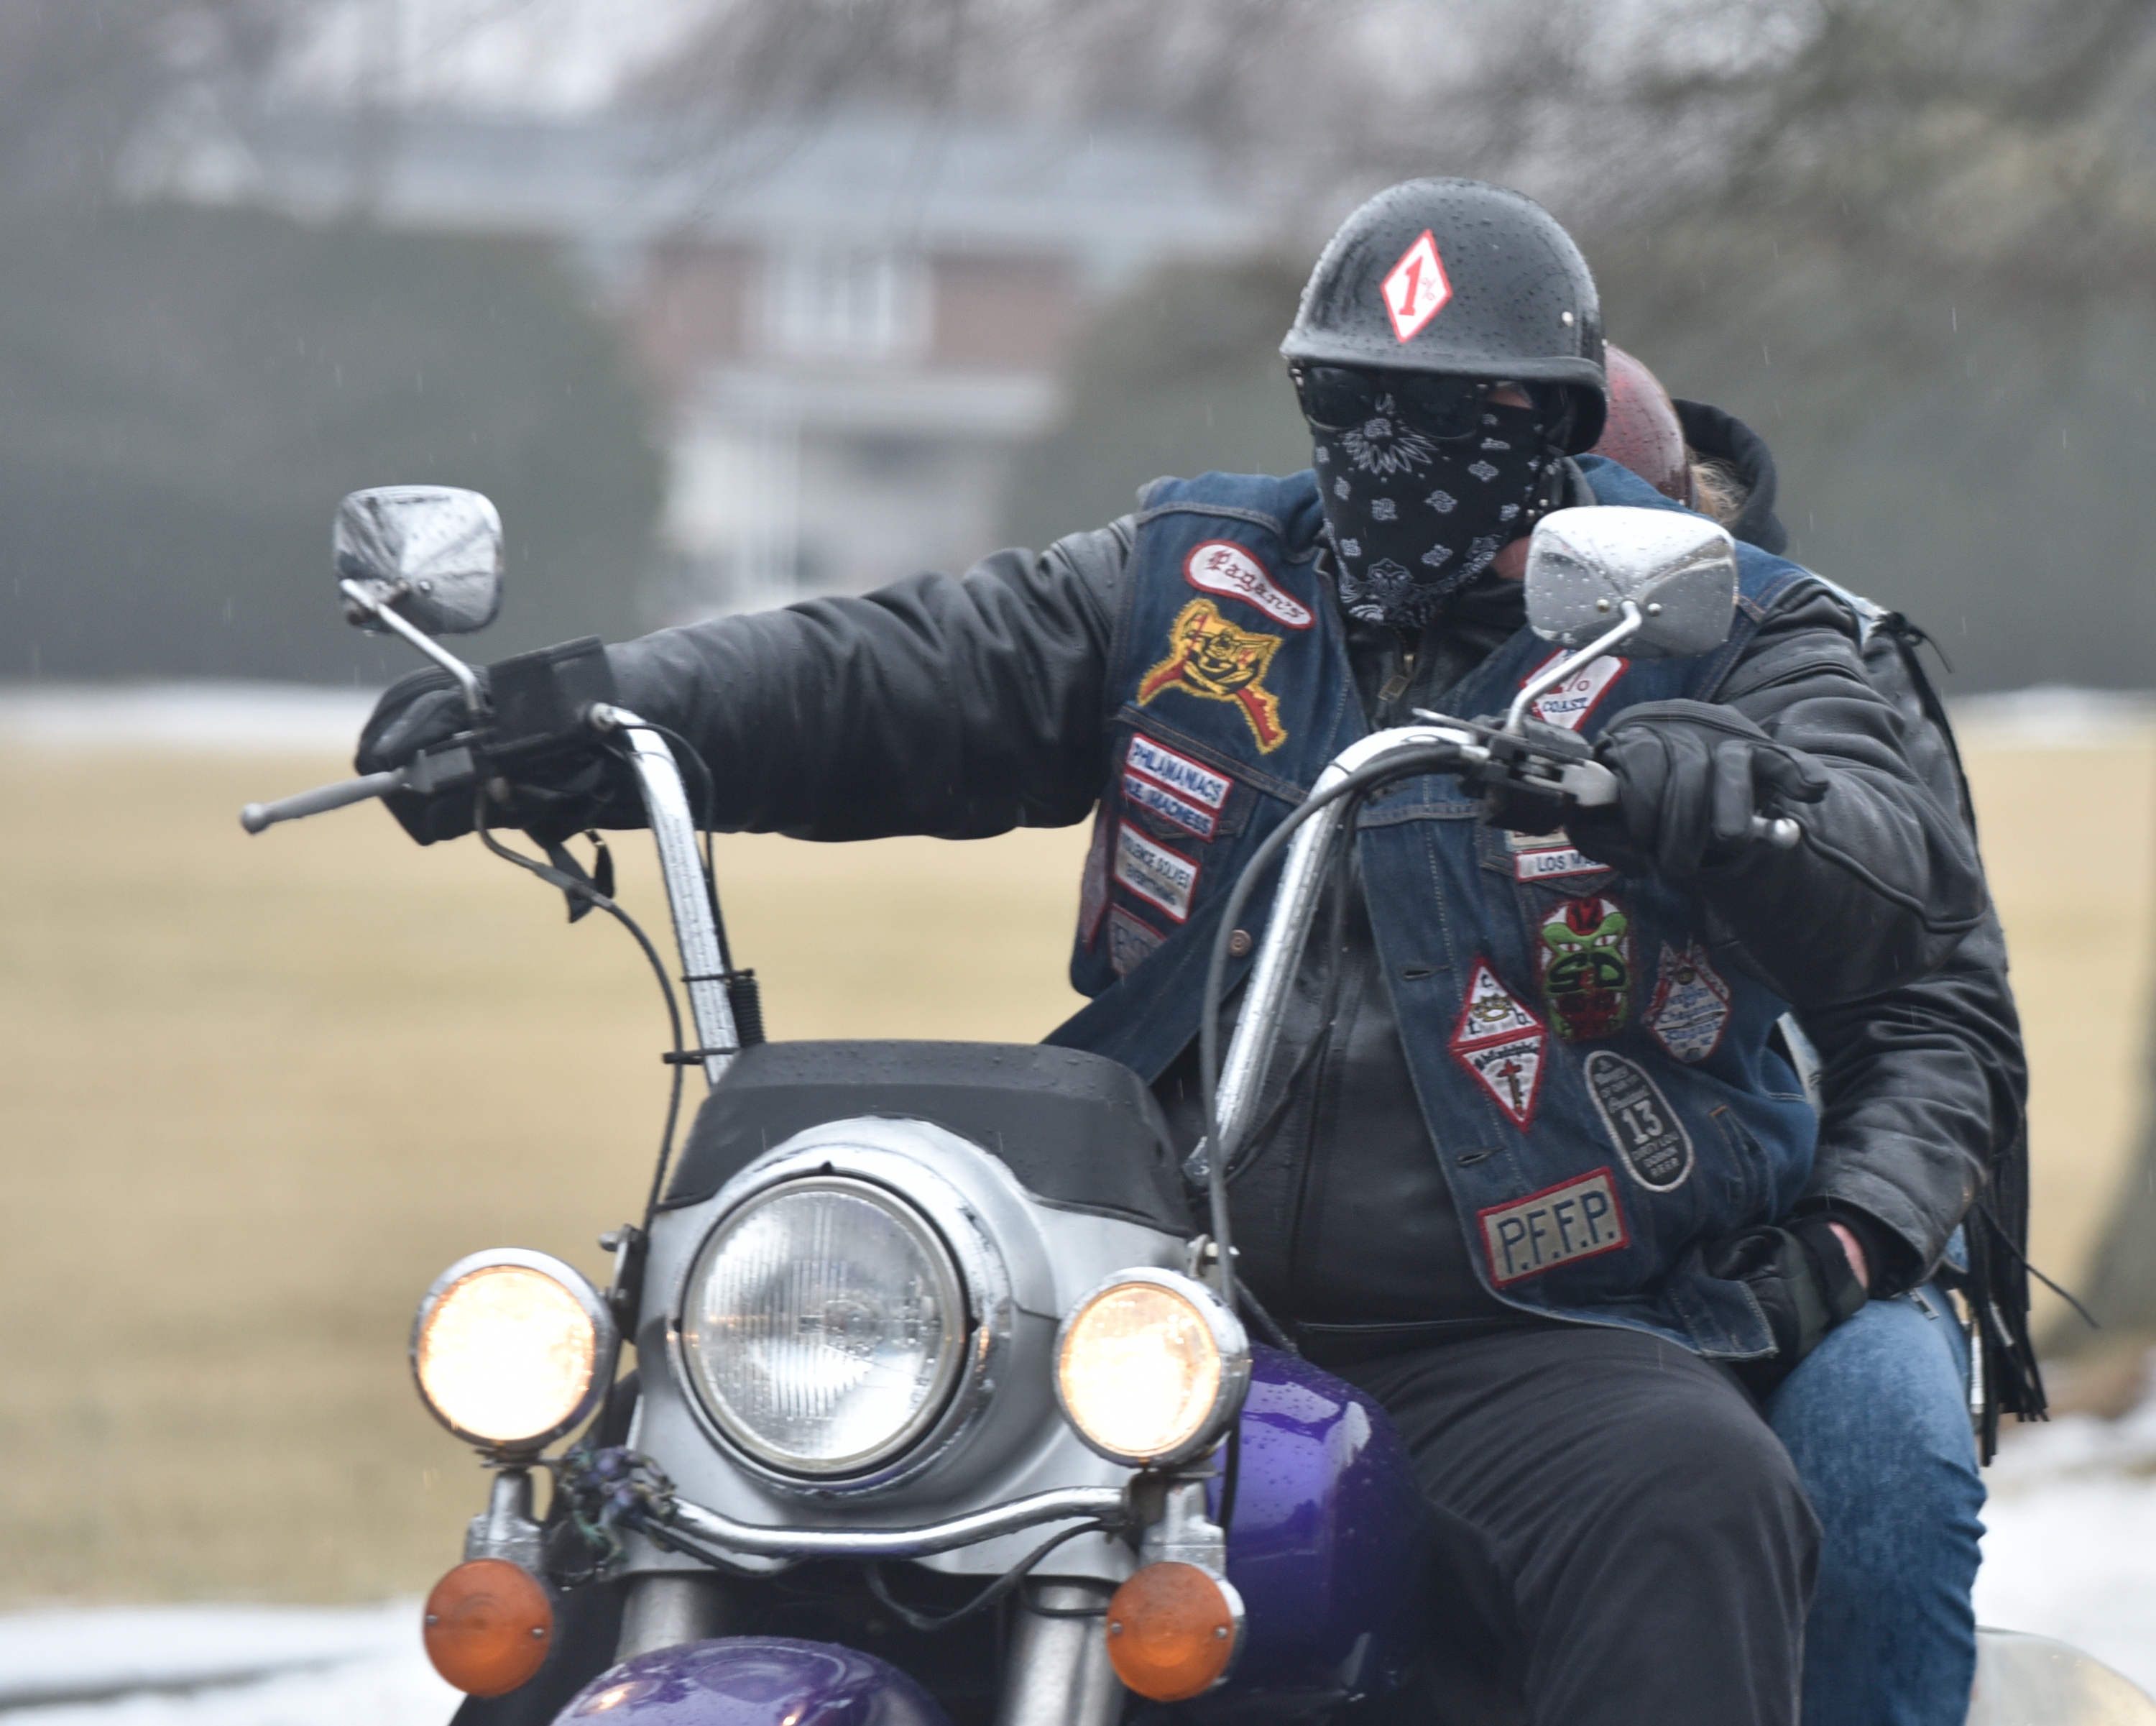 An inside look at the Pagans motorcycle club and the threat it poses in  . 